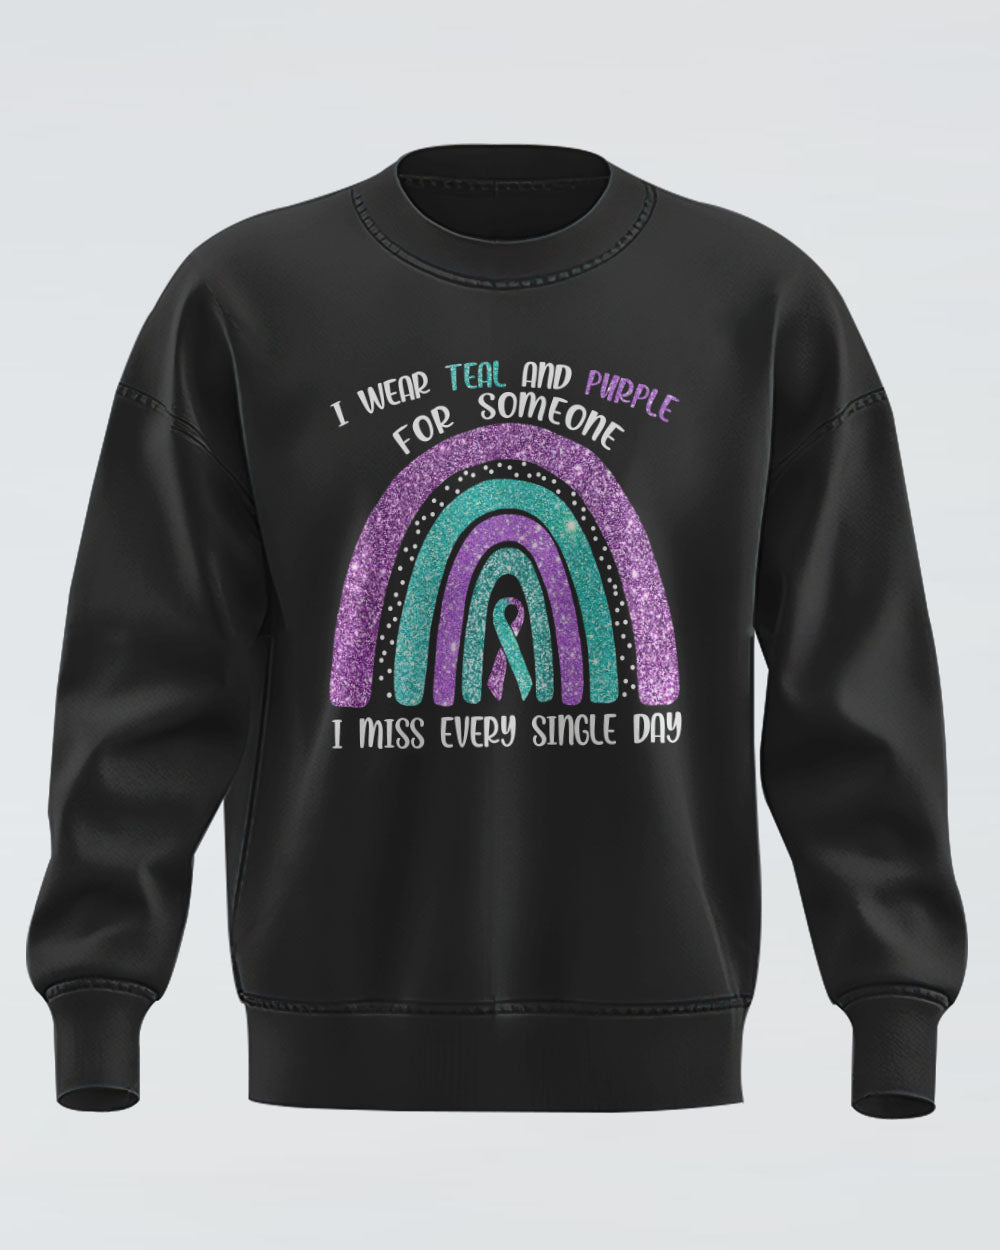 I Wear Teal And Purple For Someone Rainbow Women's Suicide Prevention Awareness Sweatshirt